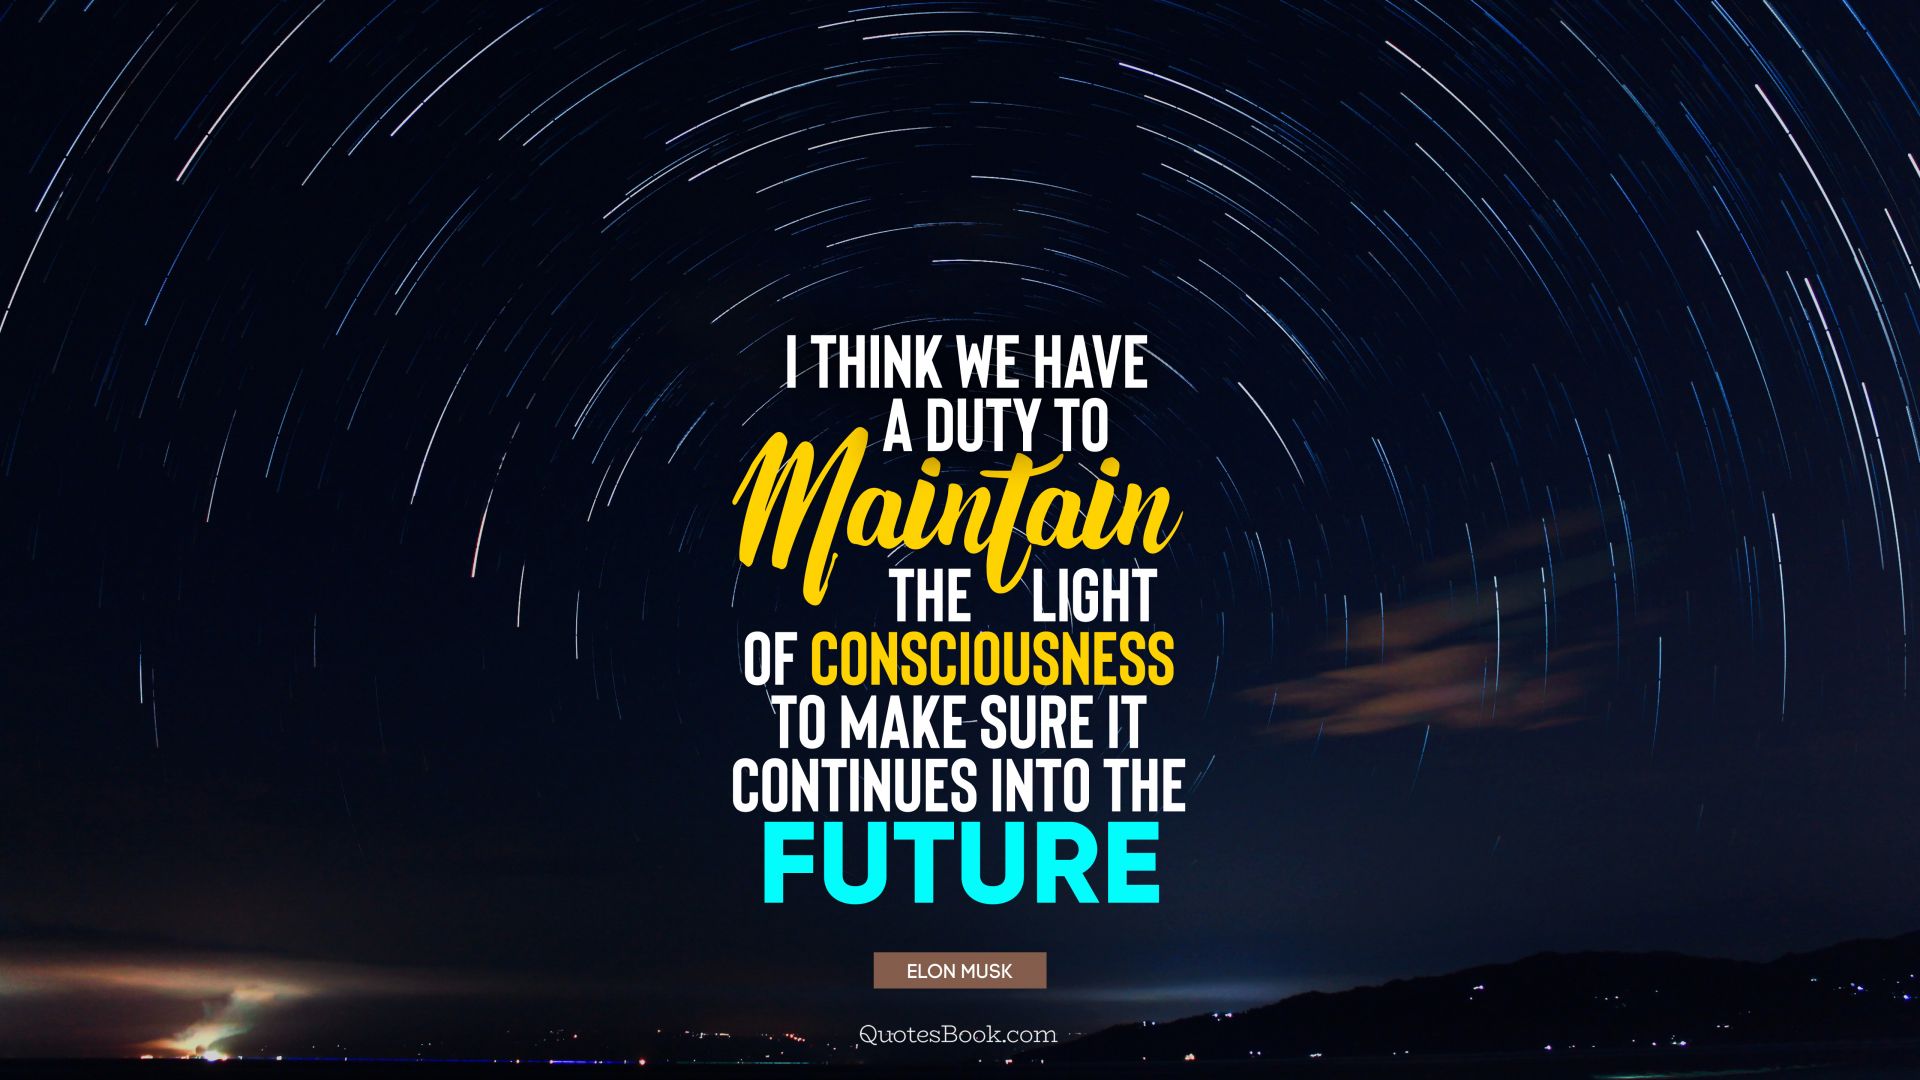 I think we have a duty to maintain the light of consciousness to make sure it continues into the future. - Quote by Elon Musk